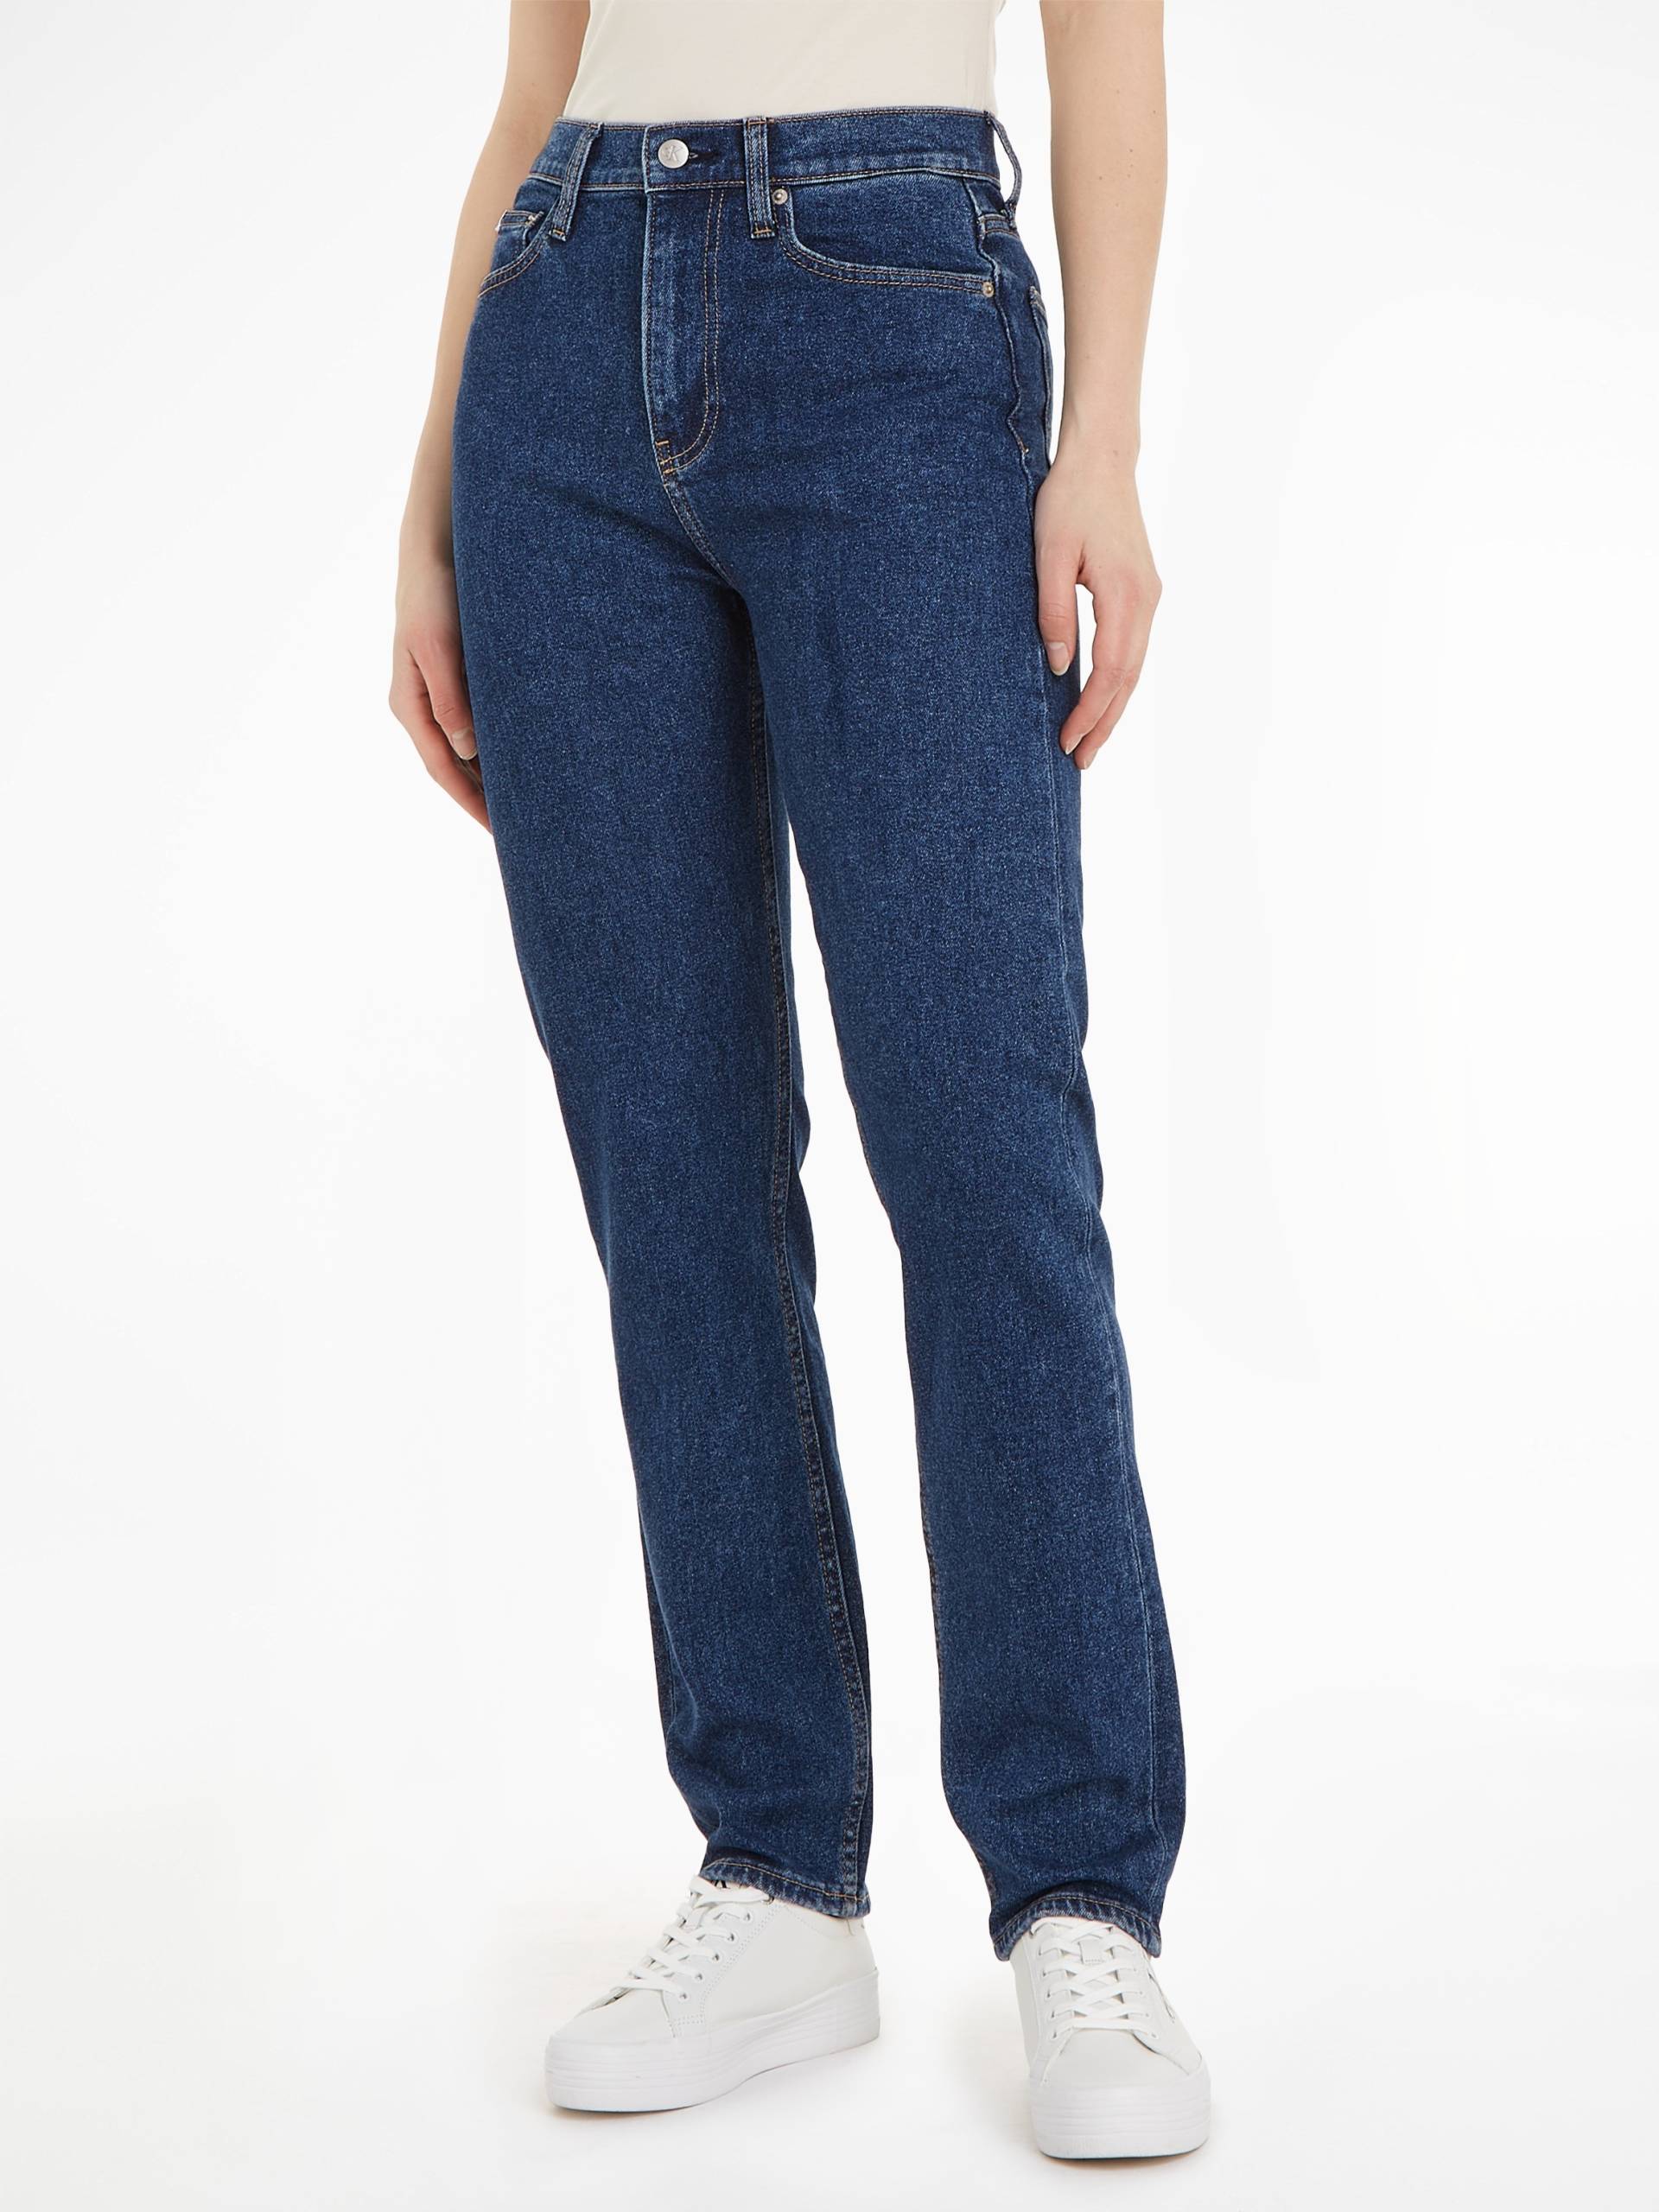 Calvin Klein Jeans Straight-Jeans »AUTHENTIC SLIM STRAIGHT« von Calvin Klein Jeans